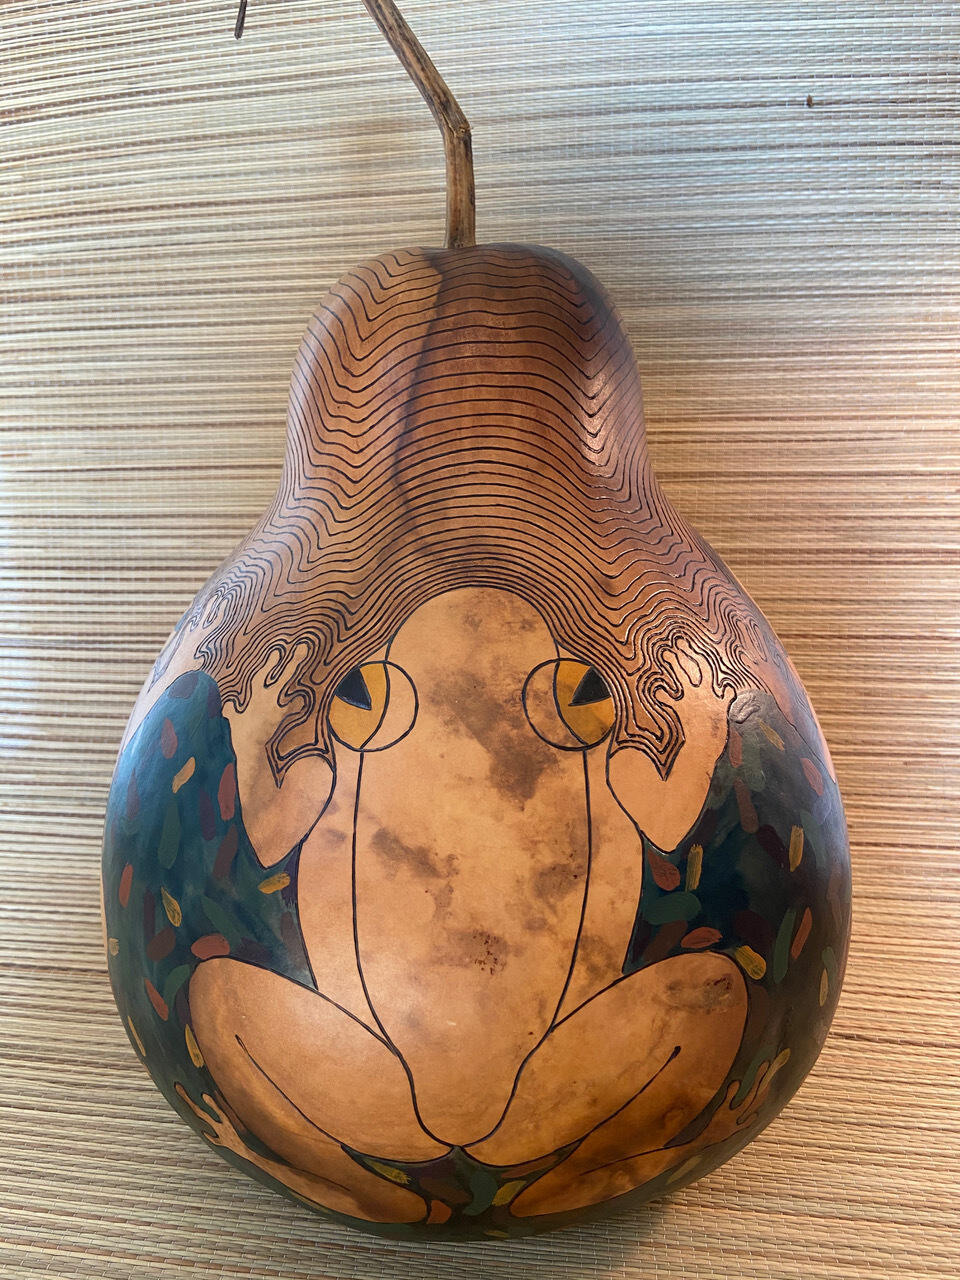 A dried gourd with an illustration of a frog on it 